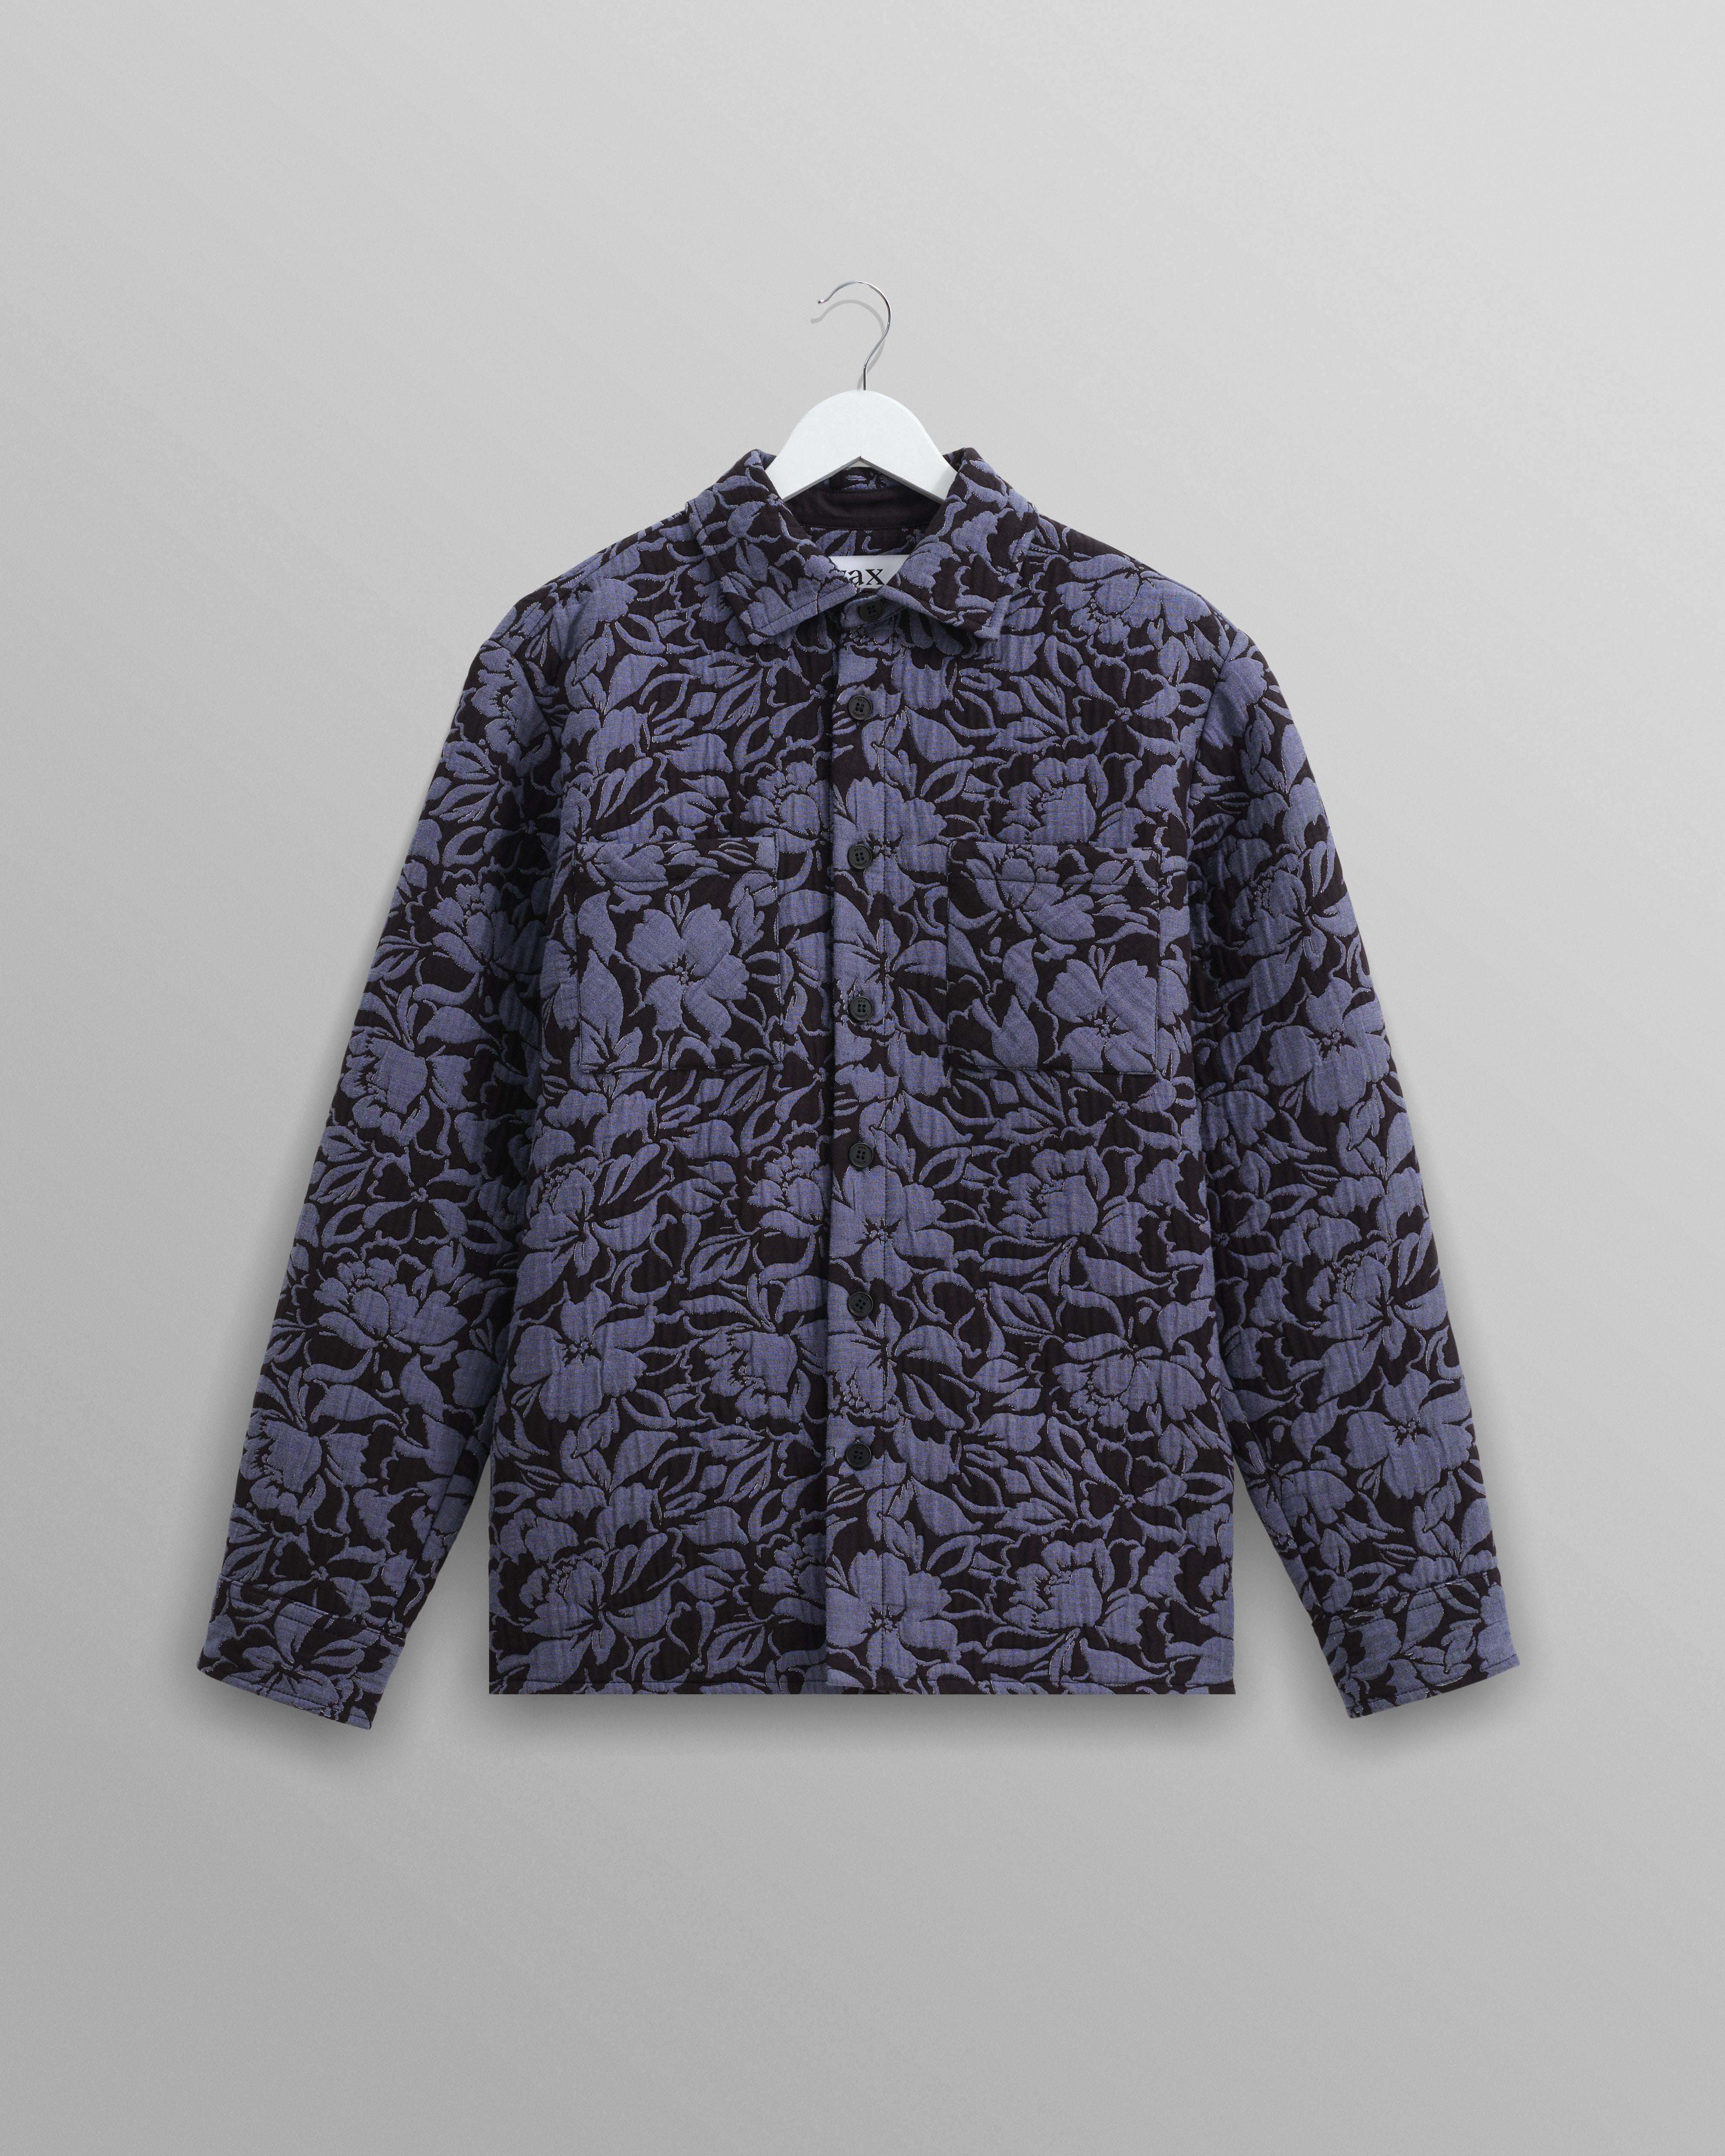 Otto Overshirt Black/Blue Floral Quilt / XXL product